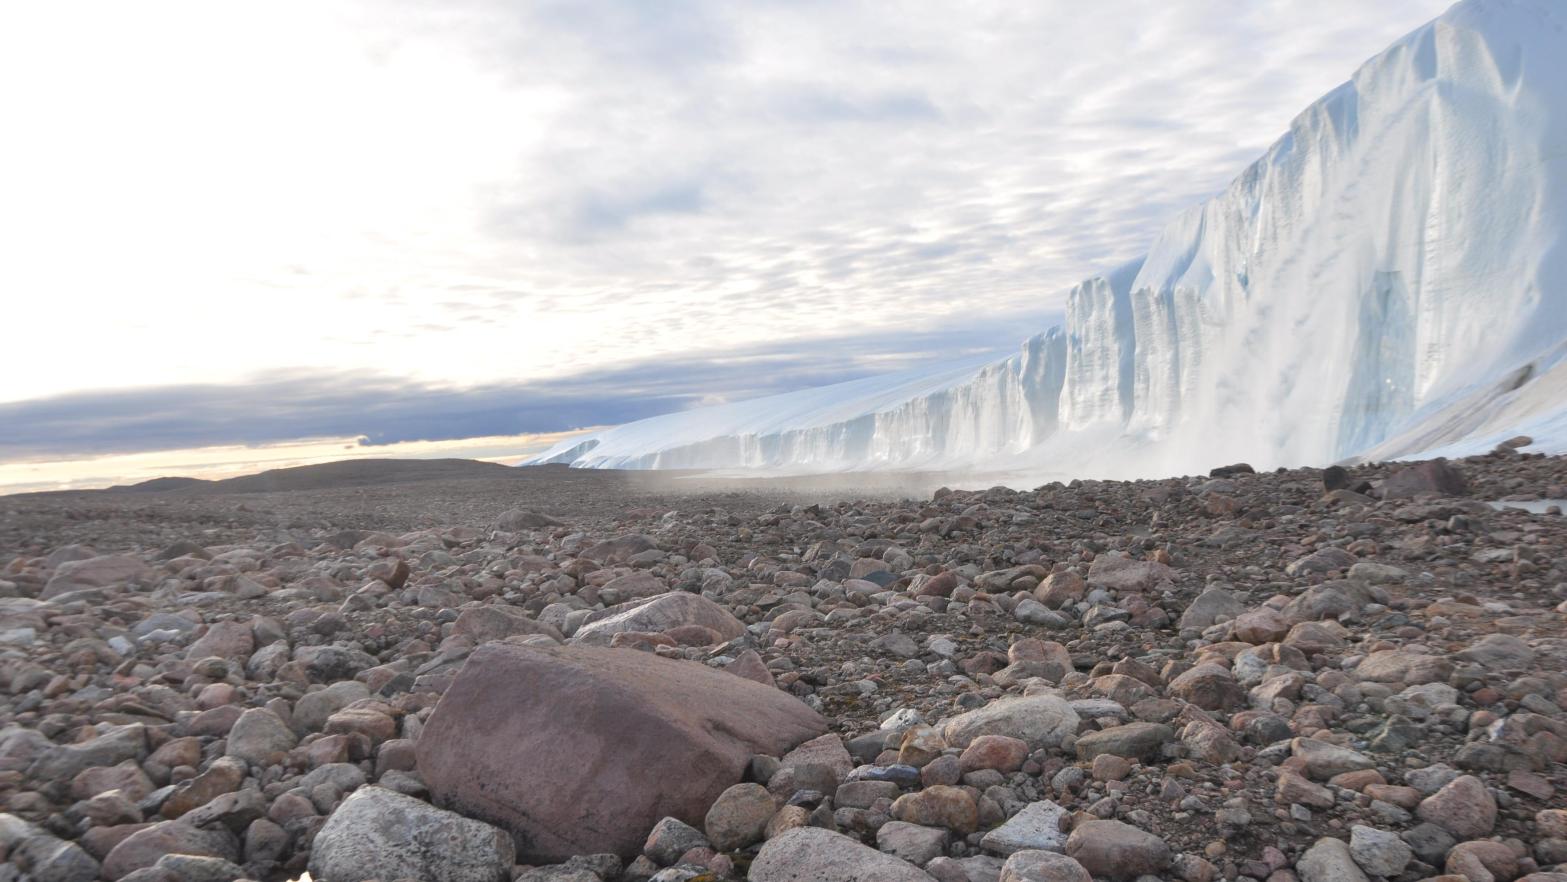 The scientists performed fieldwork at the edge of the Greenland Ice Sheet.  (Photo: Pierre Beck)